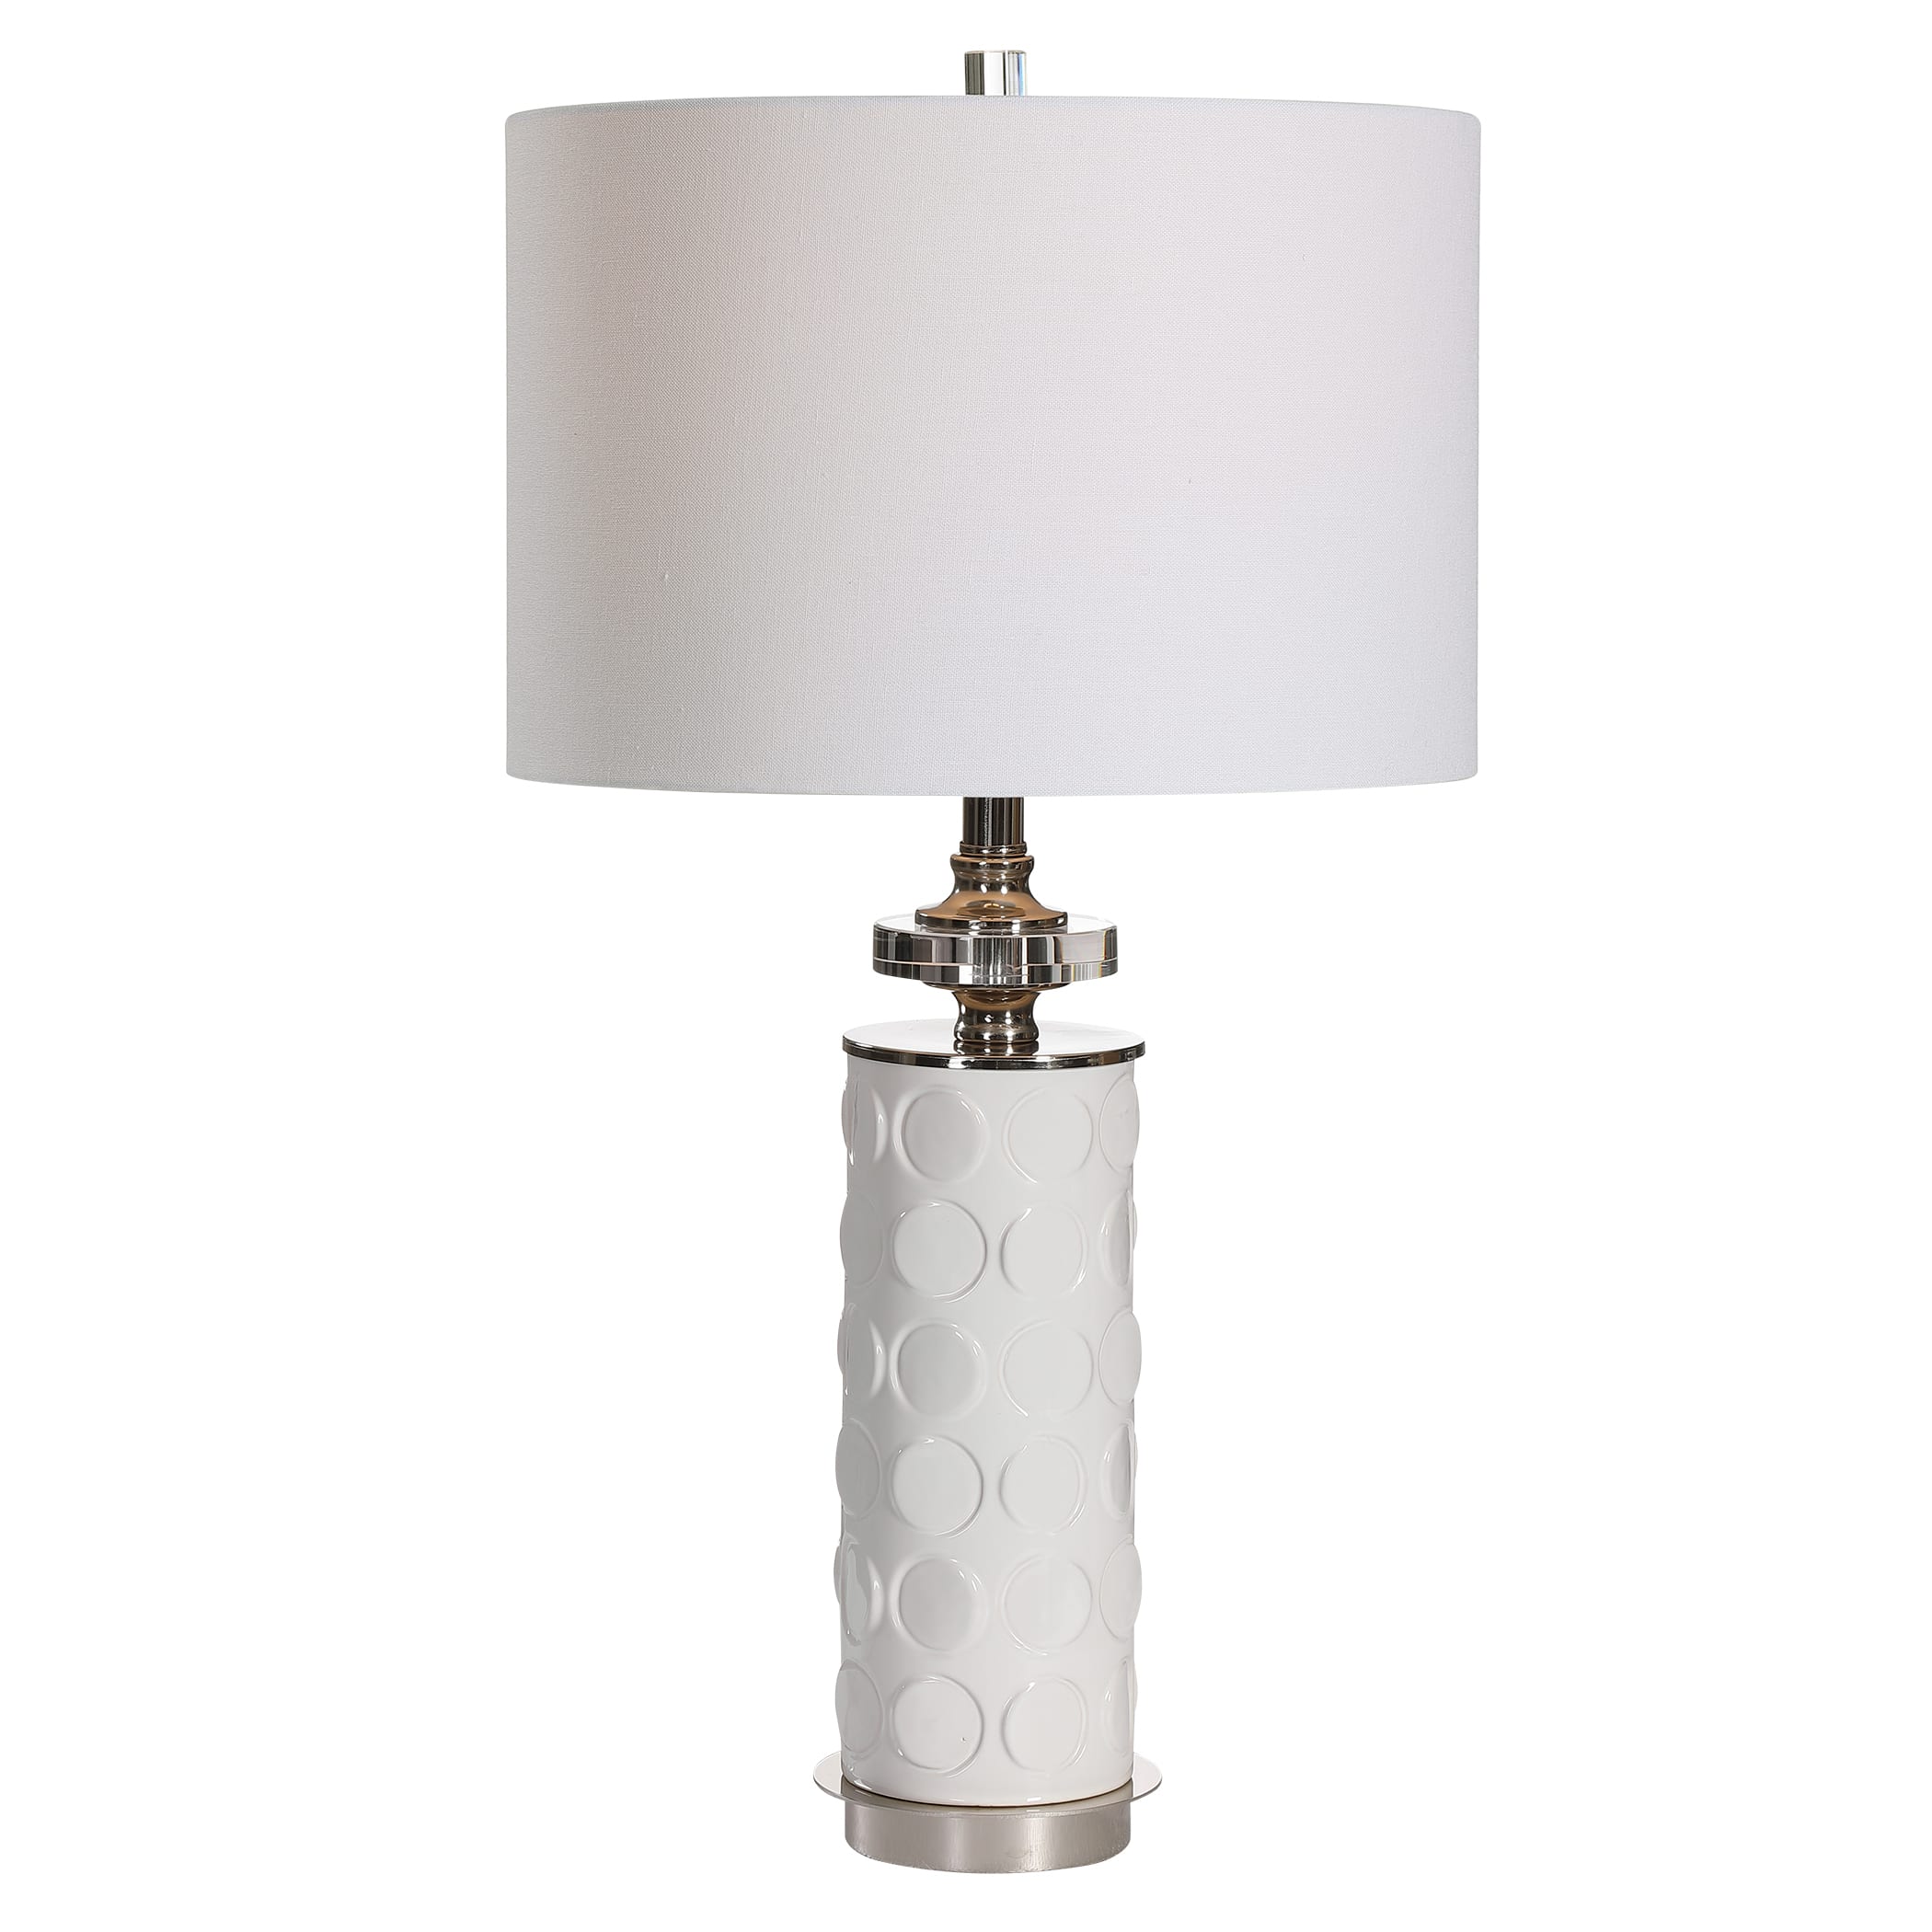 Andean Buffet Table Lamp w/ Ivory/Brown Stone Finish 30"H Uttermost 29093-1